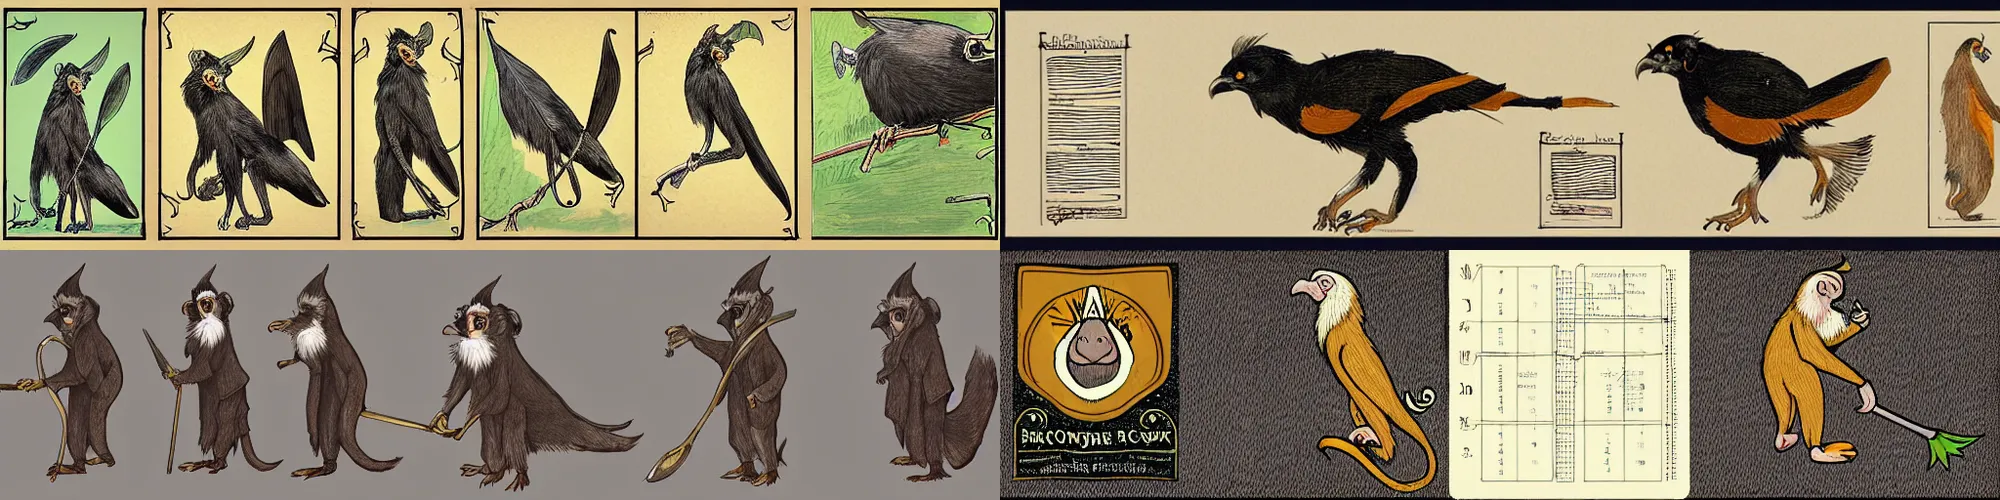 Prompt: character sheet of long - eared crow monkey wearing raincoat and using pitchfork, poses, tonalist style, art nouveau illustration